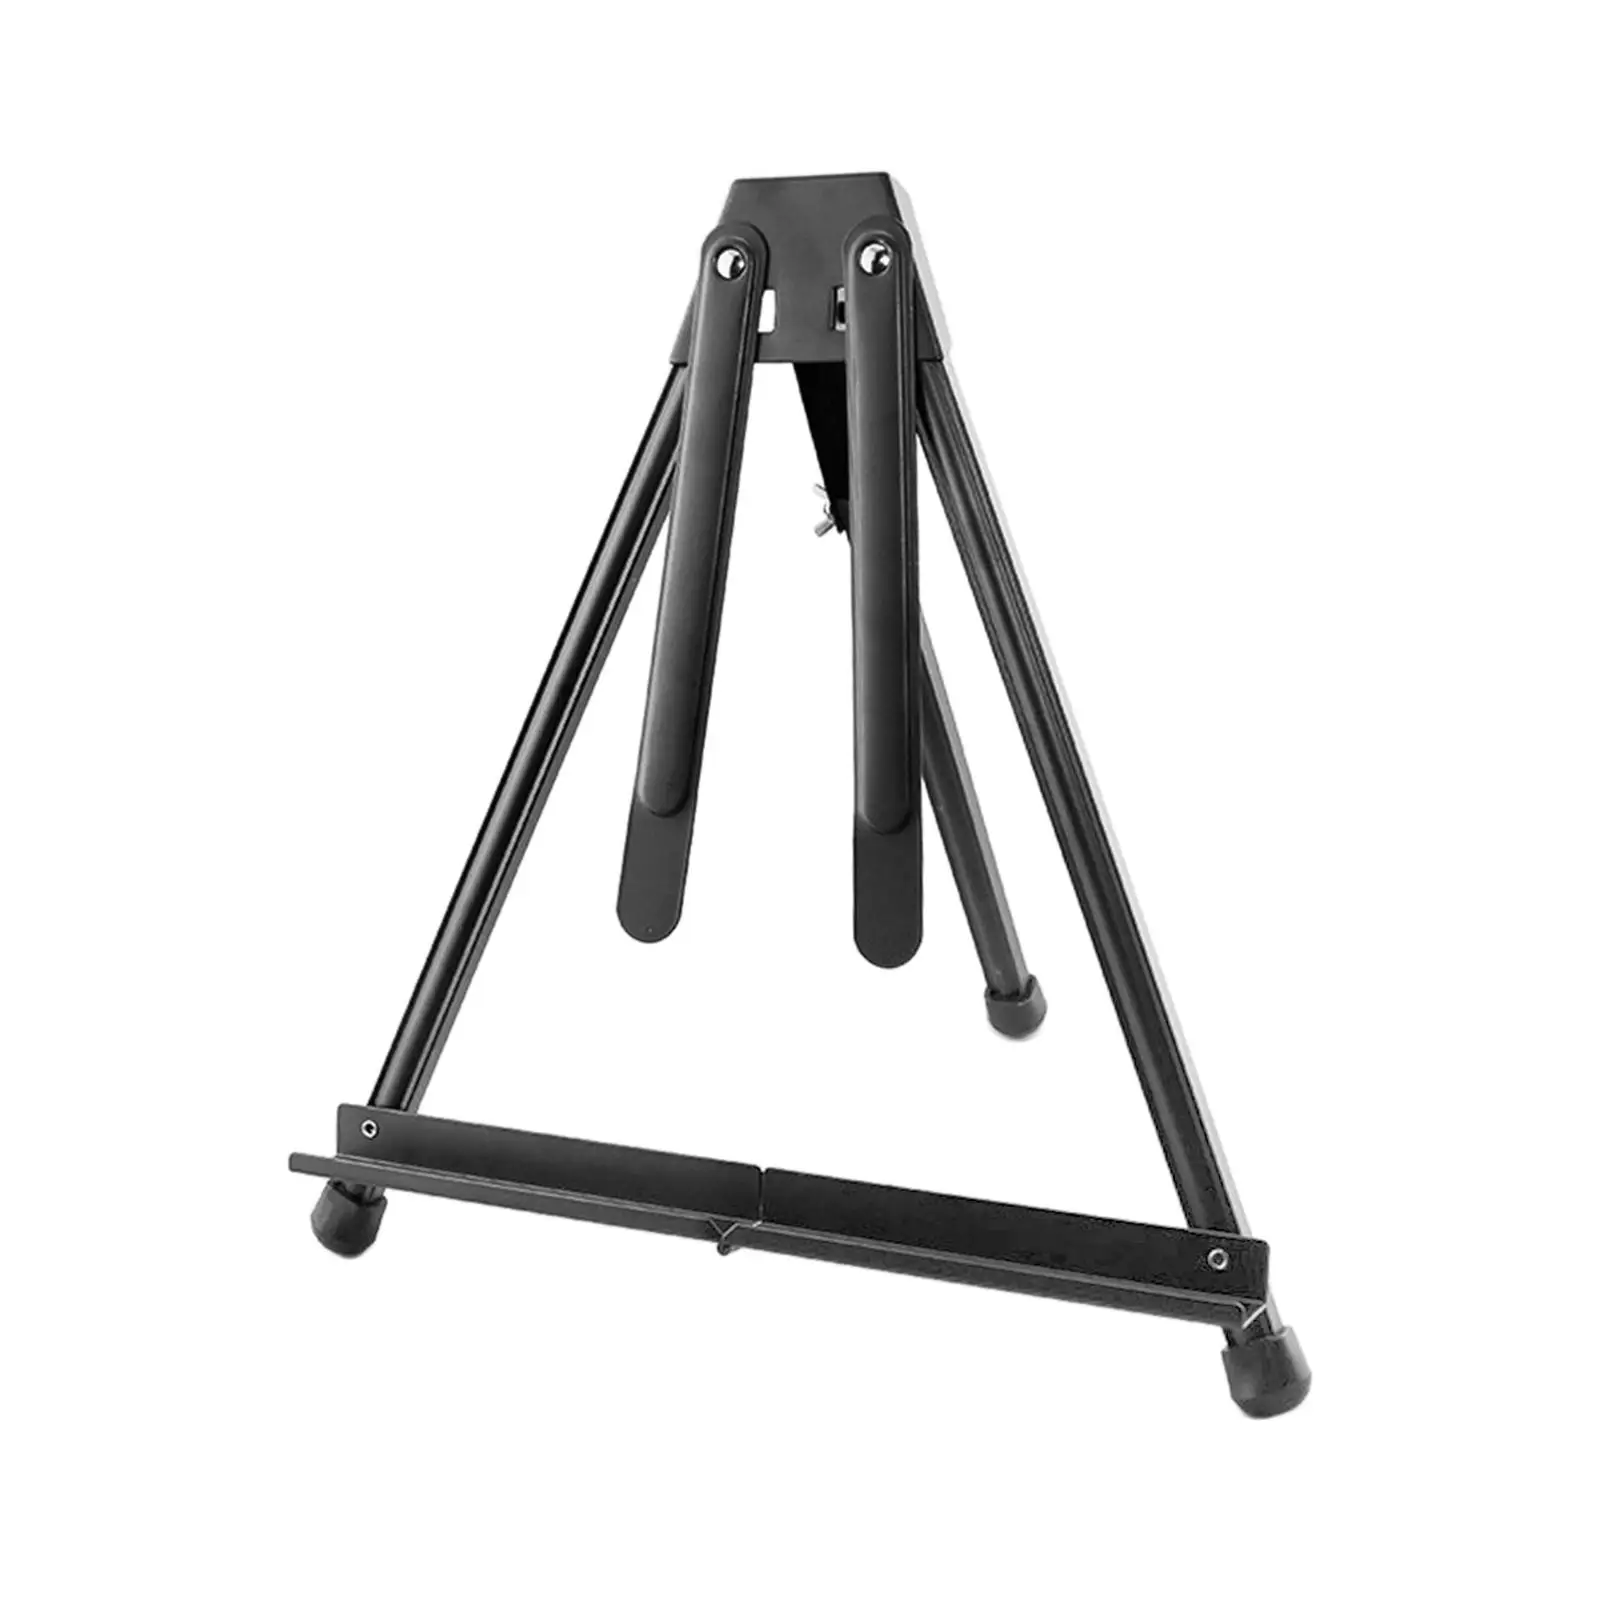 Tabletop Easel Stand Aluminum with Rotate Arm Wing Holder Tripod Display Easel for Birthday Party Photo Cemetery Displaying Art